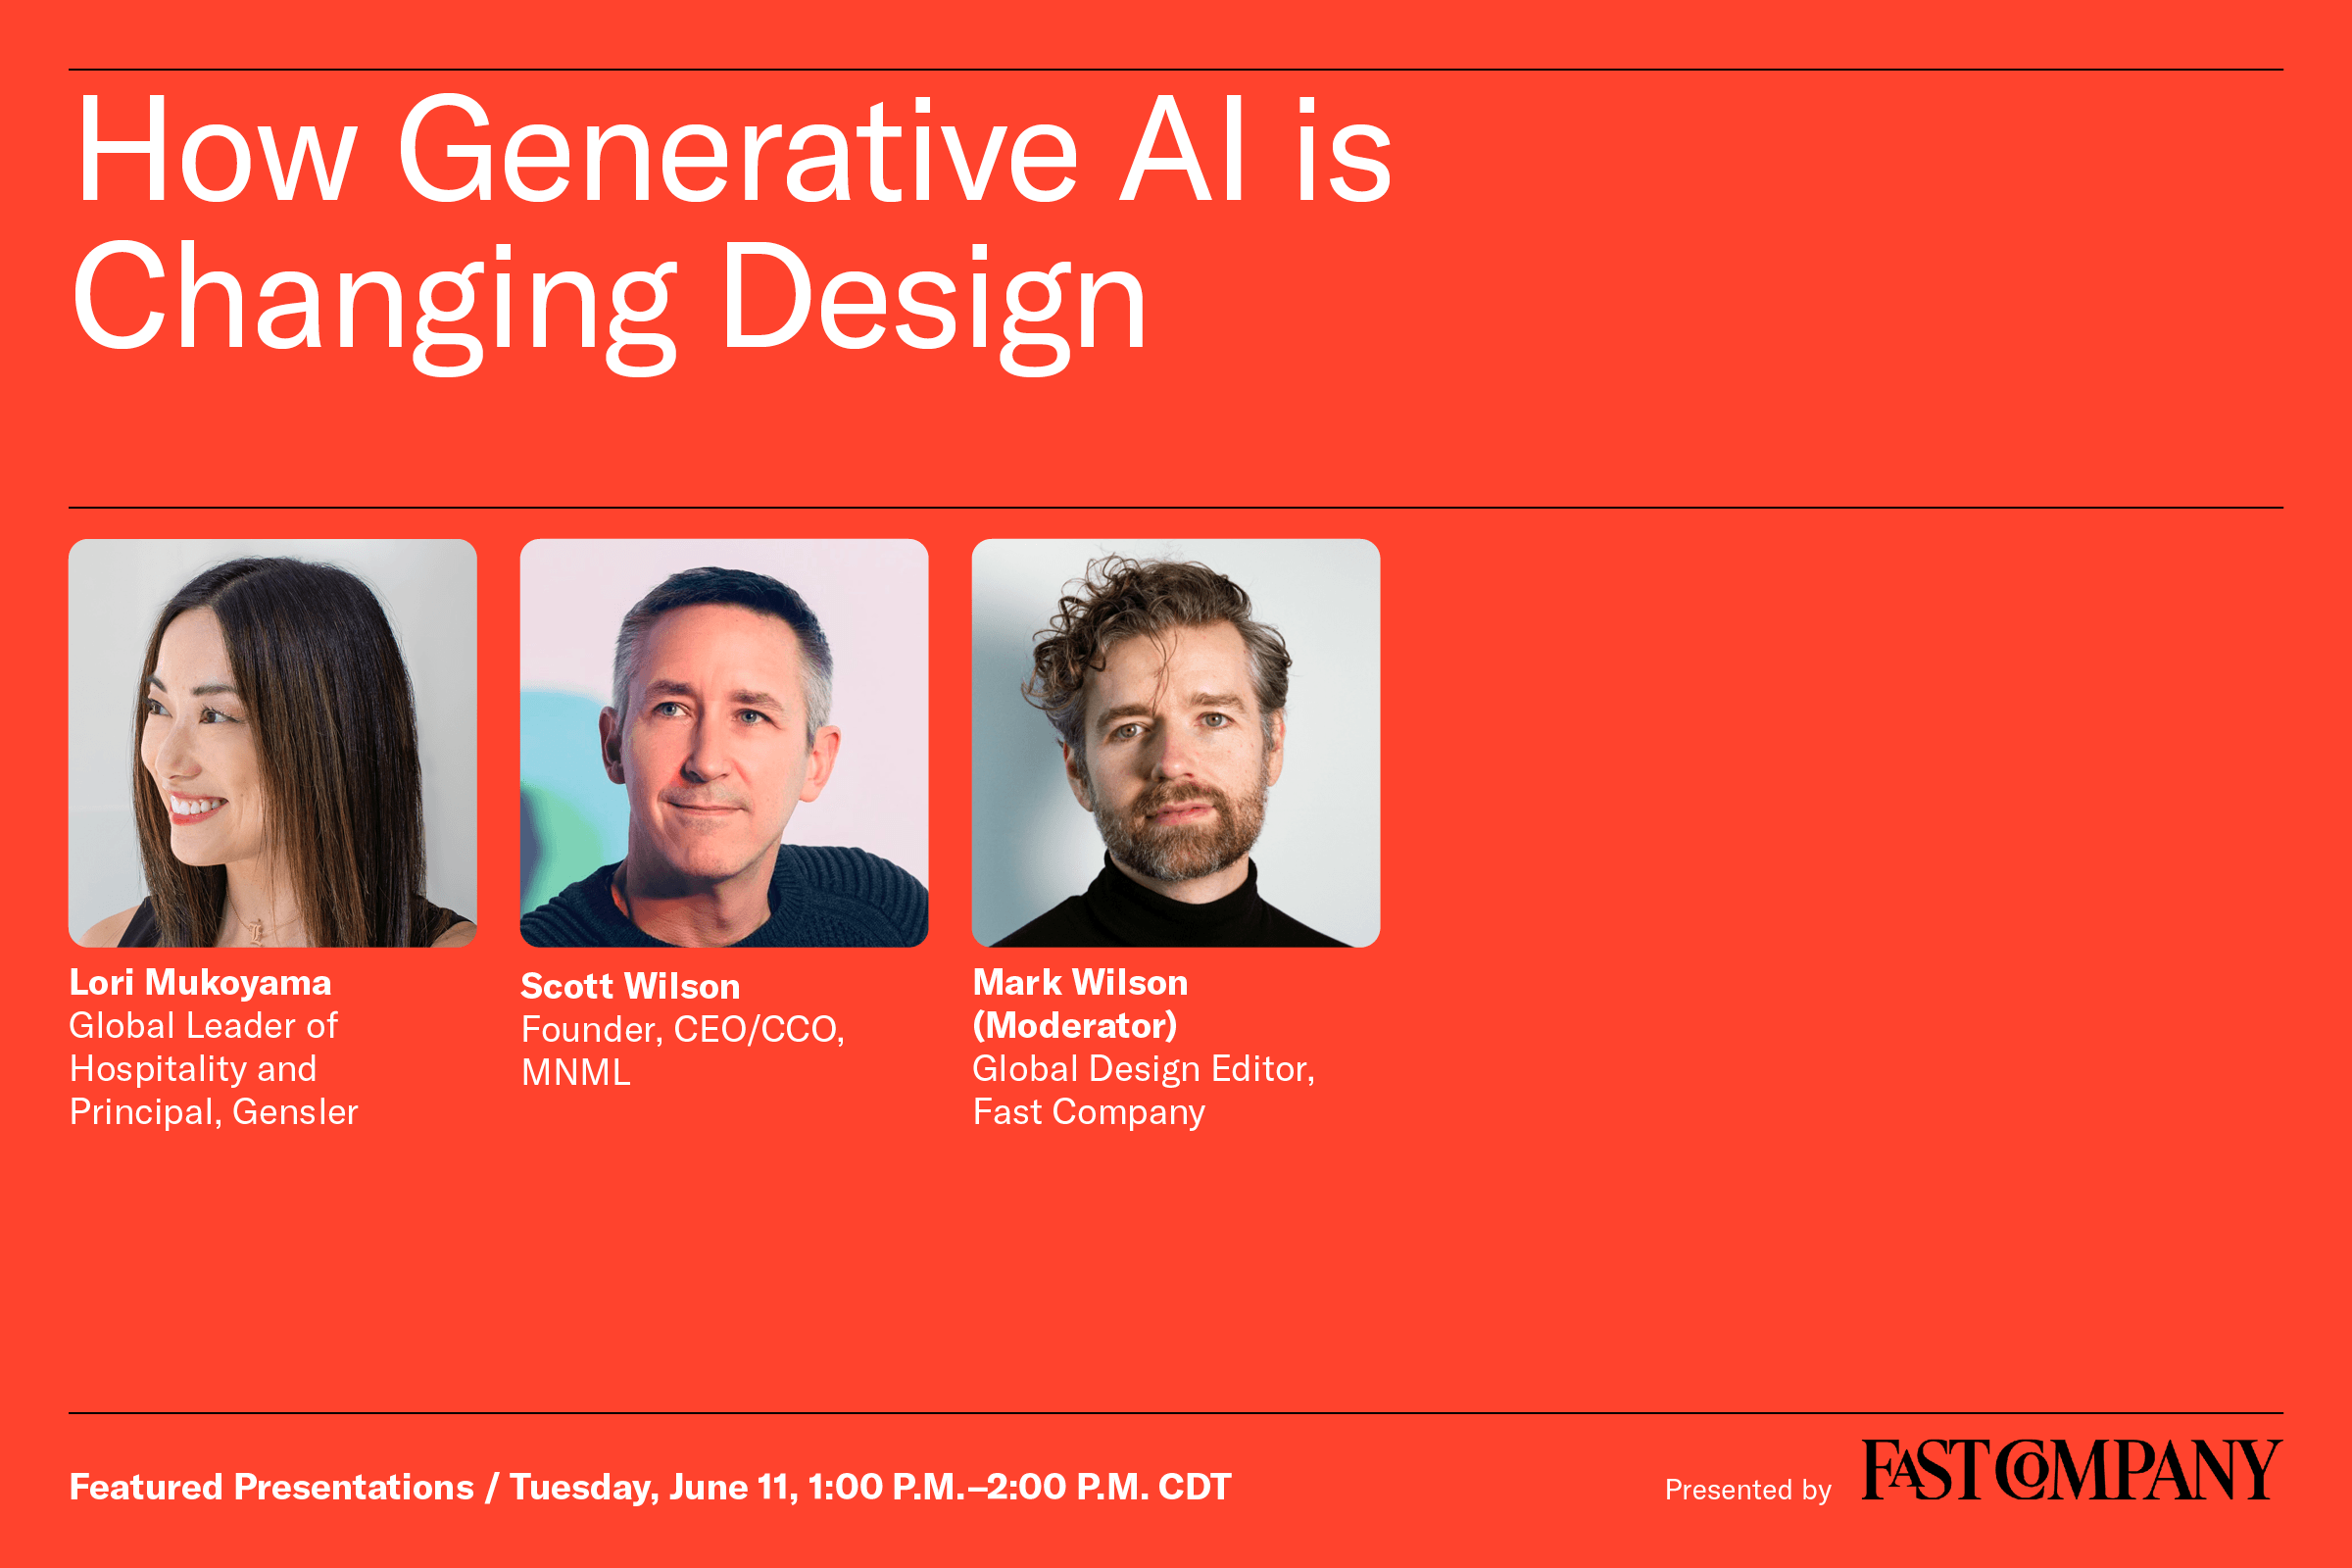 How Generative AI is Changing Design - Lori Mukoyama, Global leader of Hospitality and Principal, Gensler - Scott Wilson, Founder, CEO/CCO, MNML - Mark Wilson (Moderator), Global Design Editor, Fast Company - Featured Presentations / Tuesday, June 11, 1:00 p.m. - 2:00 p.m. CDT - Presented by Fast Company